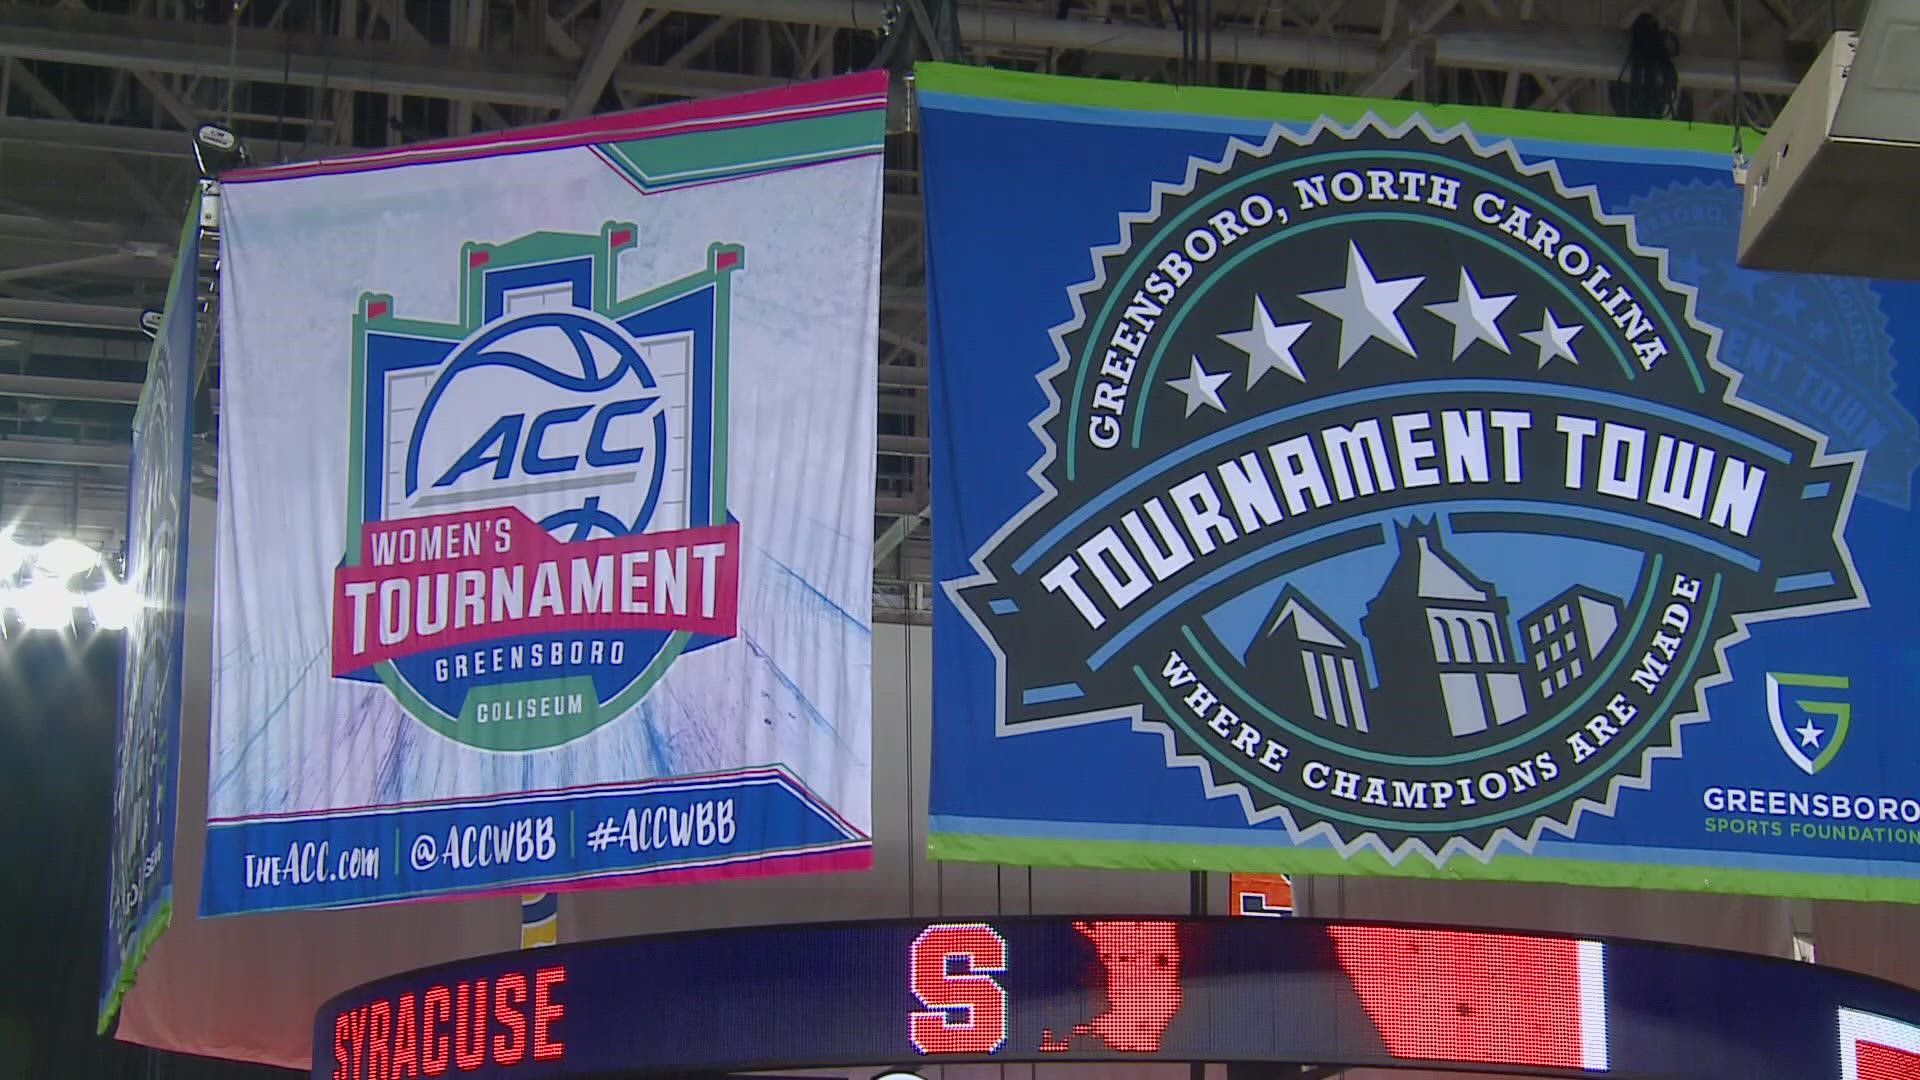 The conferences’ headquarters move from Greensboro to Charlotte has fans wondering if Greensboro will host as many ACC tournaments in the future?